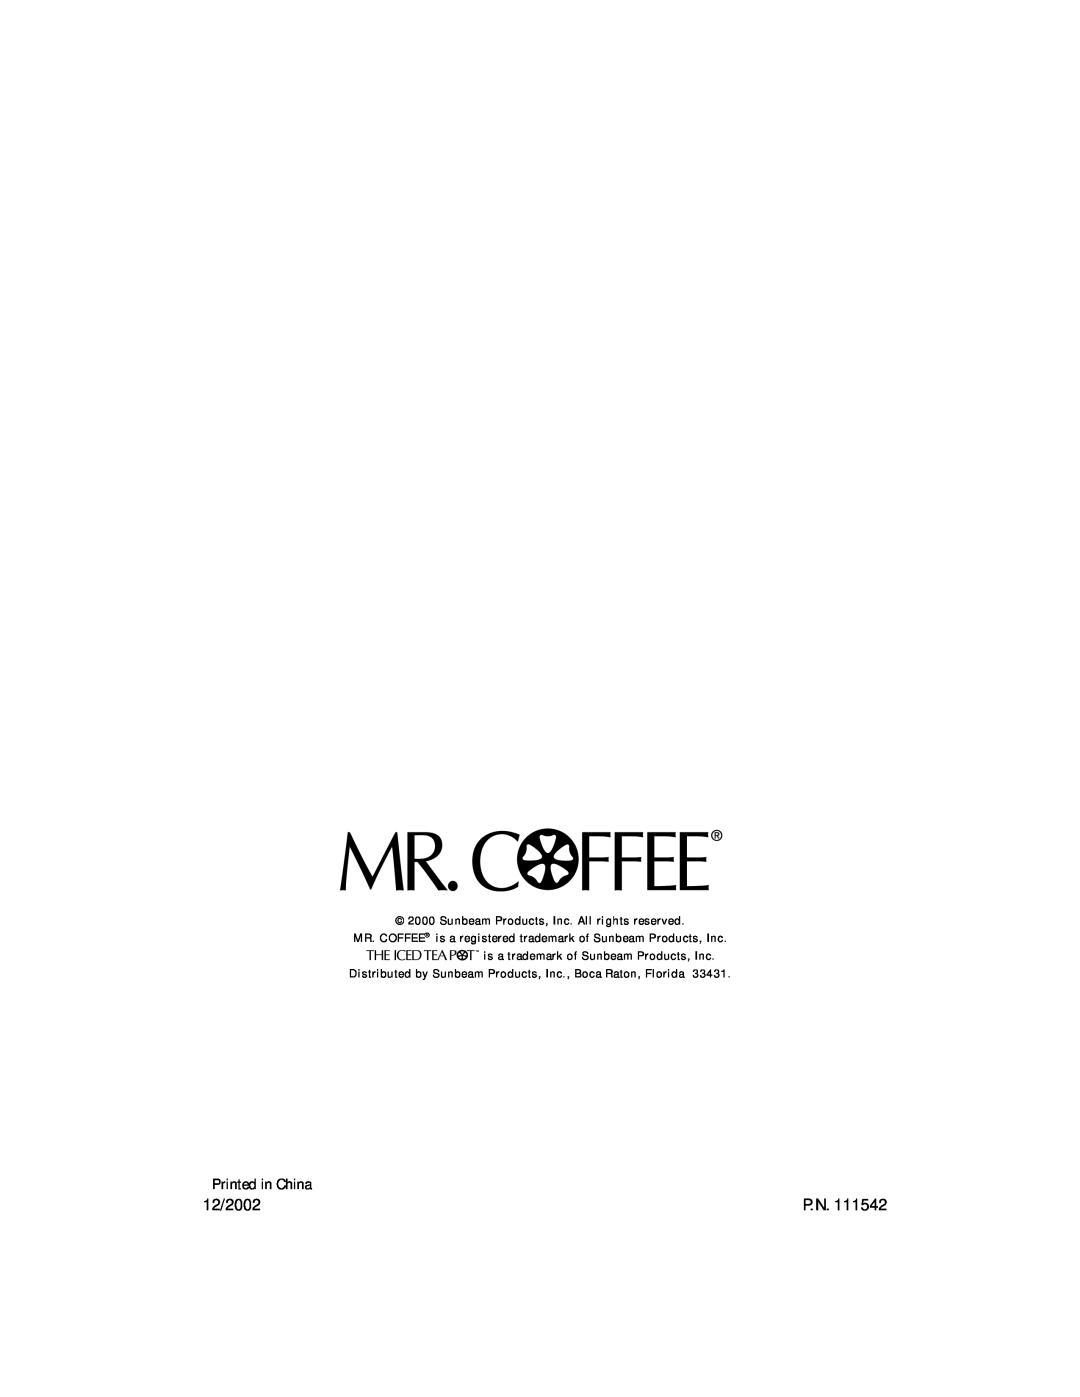 Mr. Coffee TM20 instruction manual Sunbeam Products, Inc. All rights reserved, 12/2002, P. N 